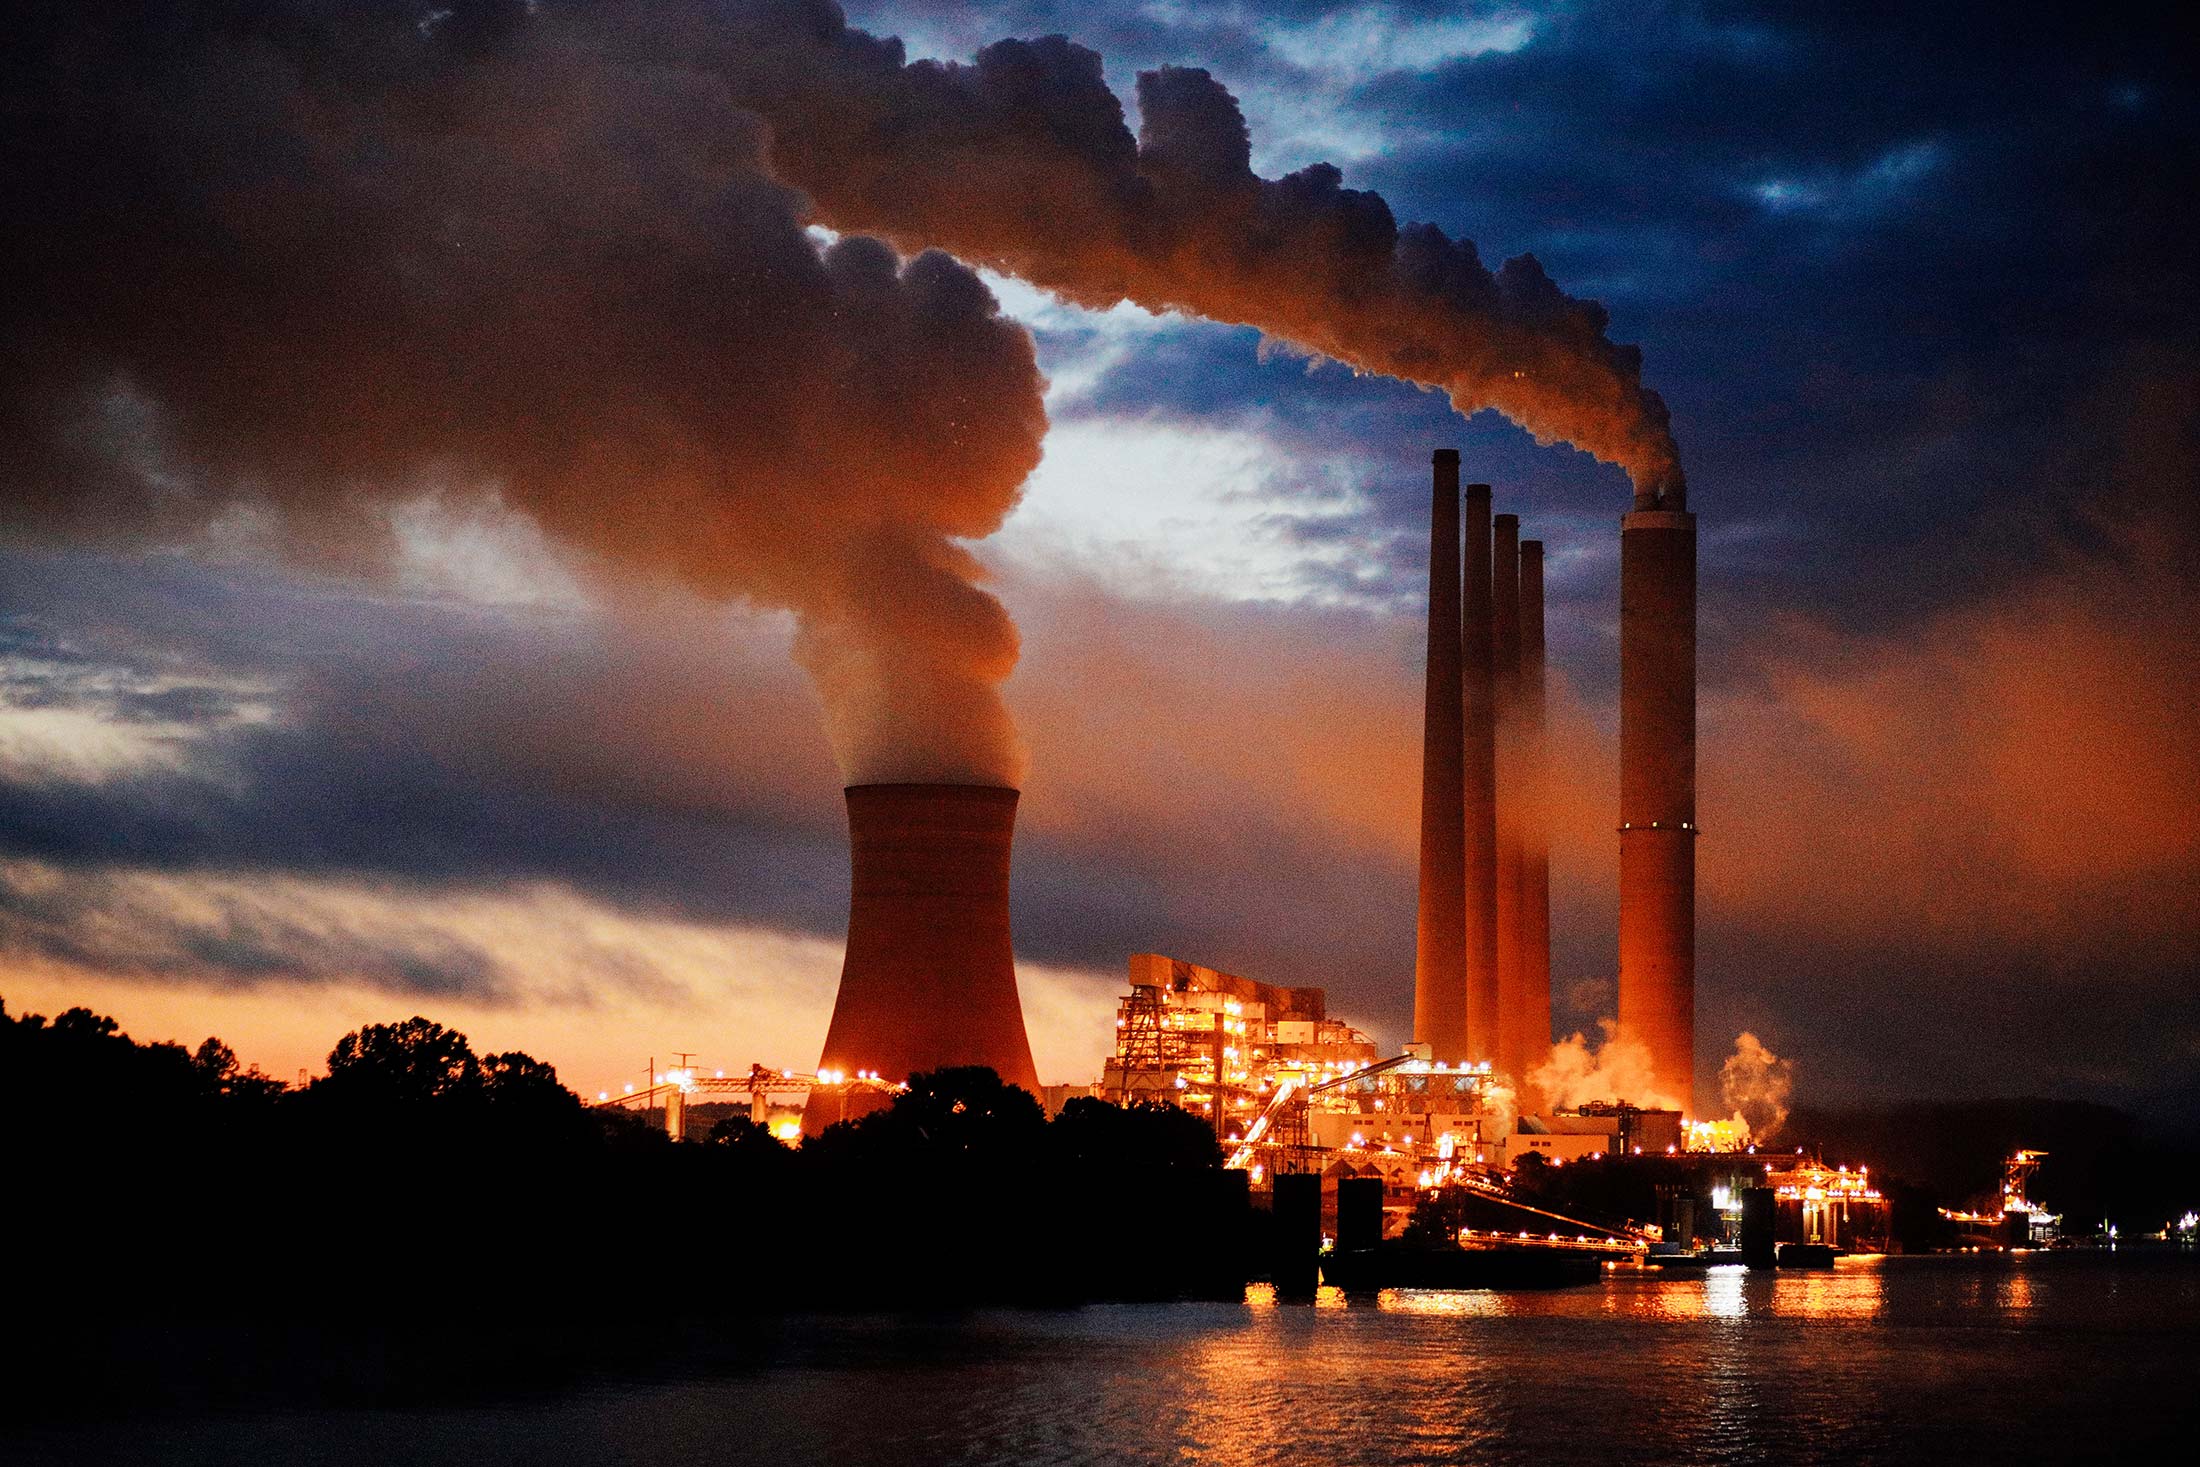 Coal-fired power plant lights up the early morning sky on the banks of the Ohio River.